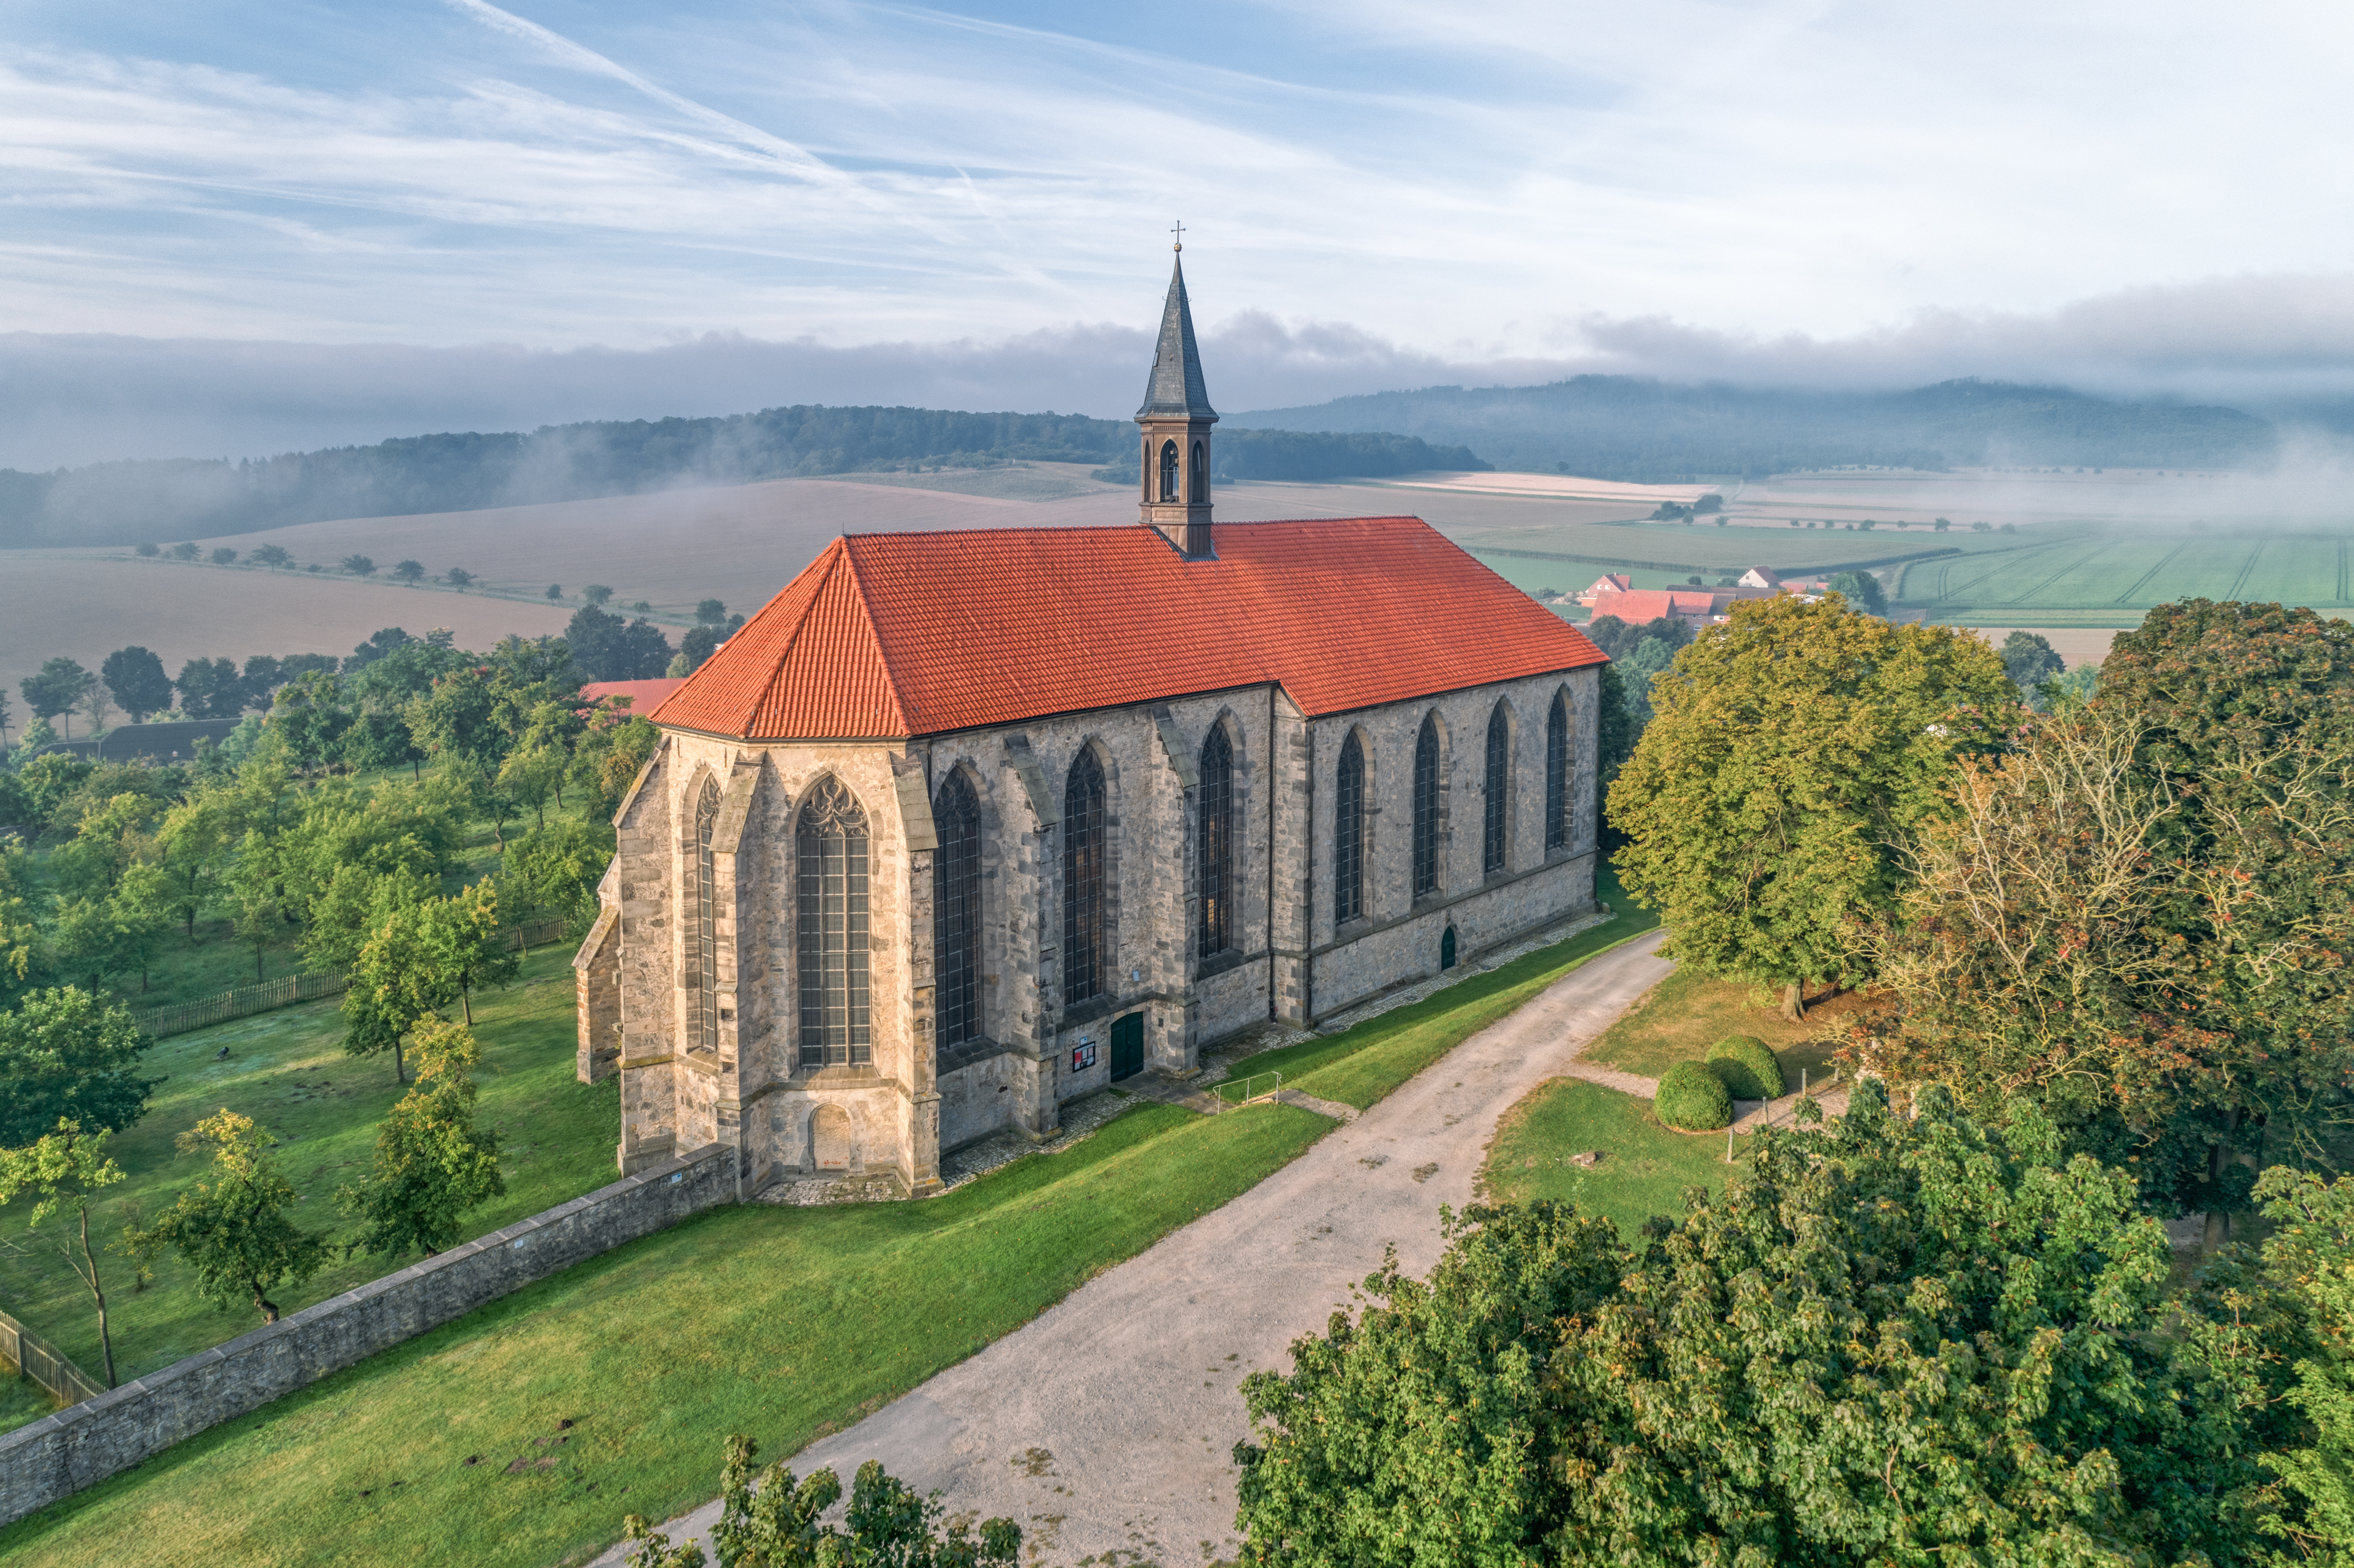 Aerial shot of Klosterkirche Wittenburg, Germany by Zedstyle